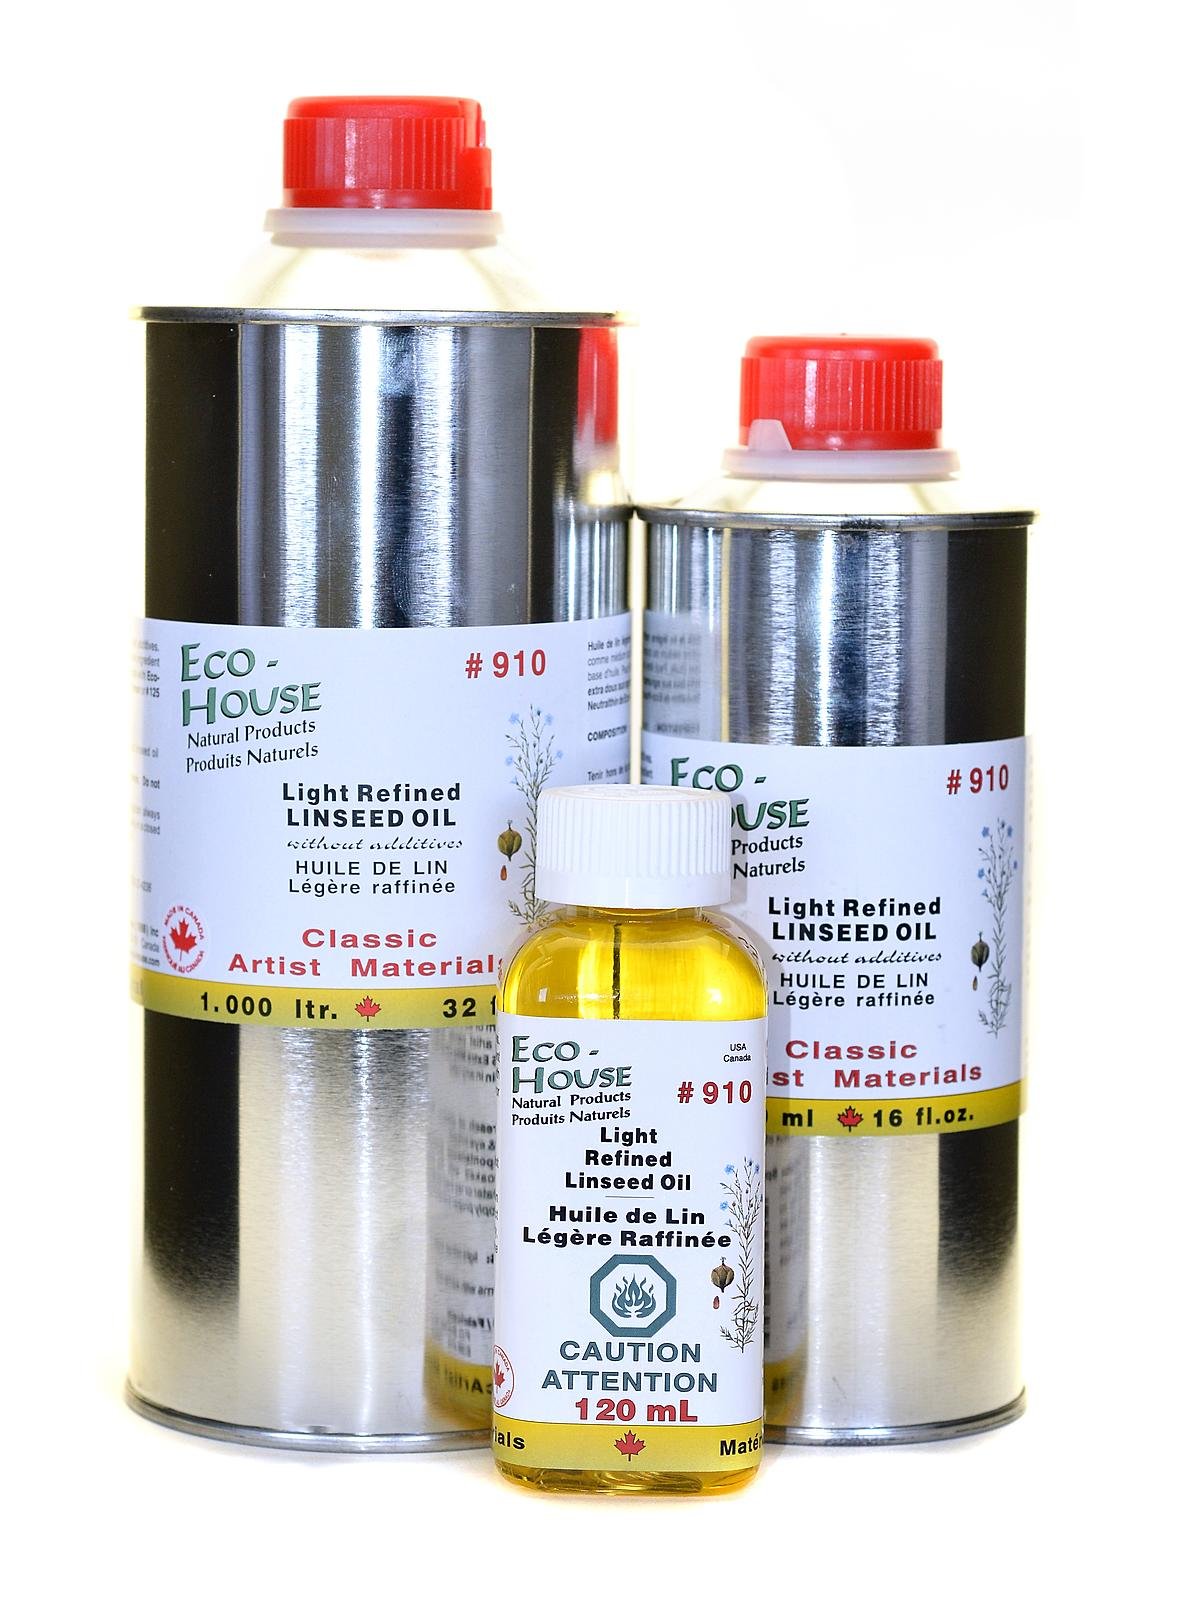 Eco-House - Light Refined Linseed Oil